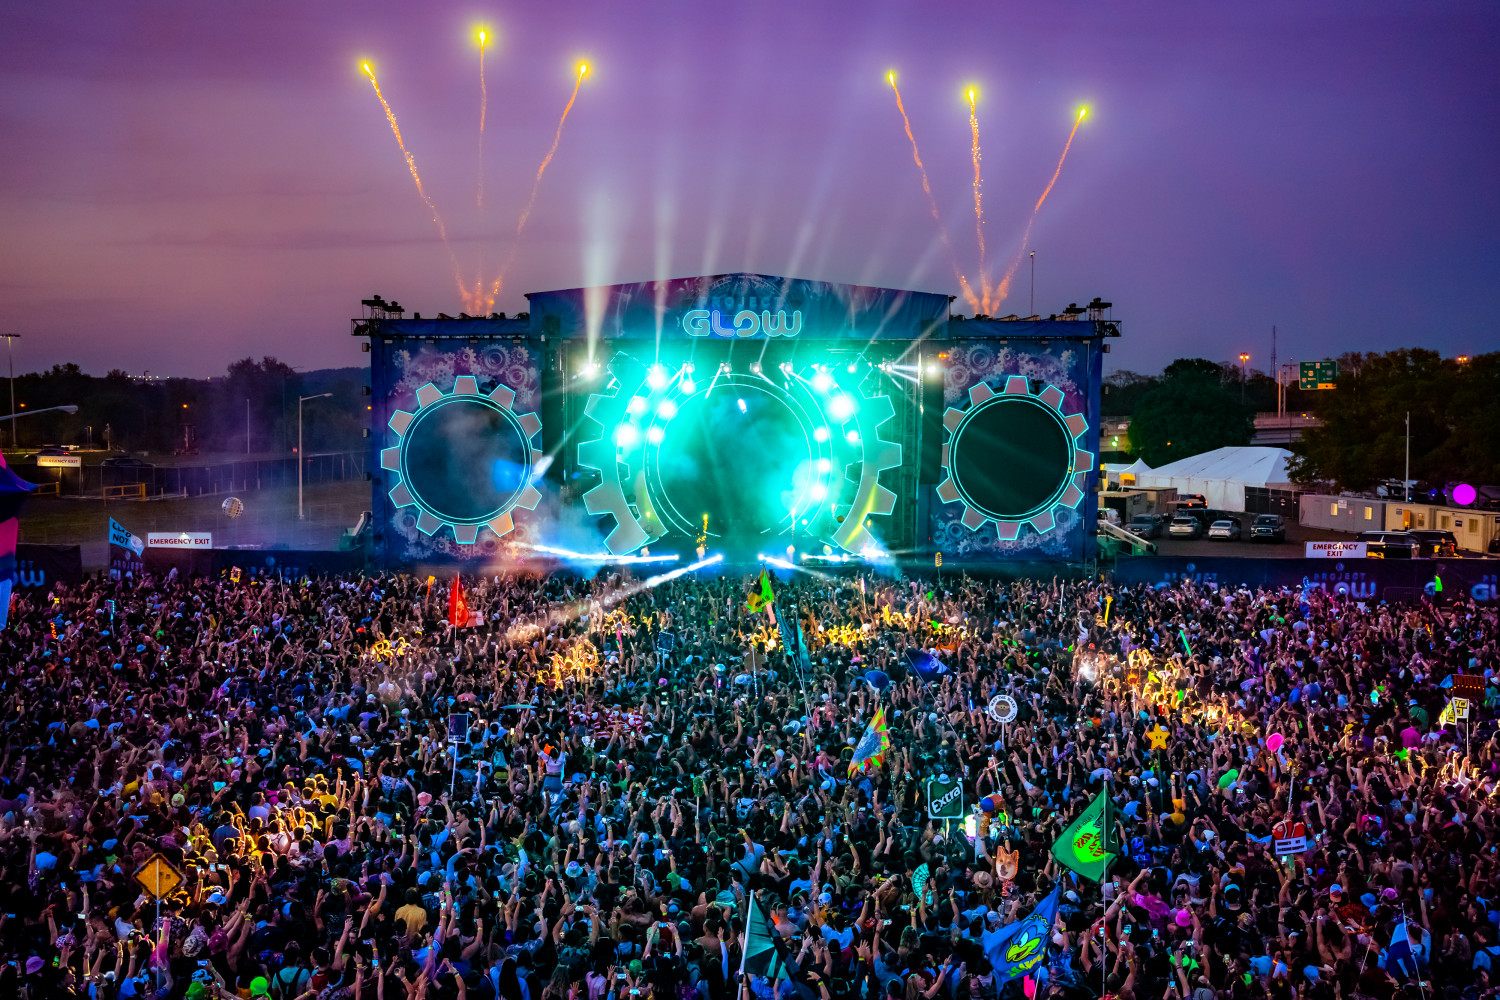 Insomniac Announces Enormous Project Glow Festival In Philadephia This October